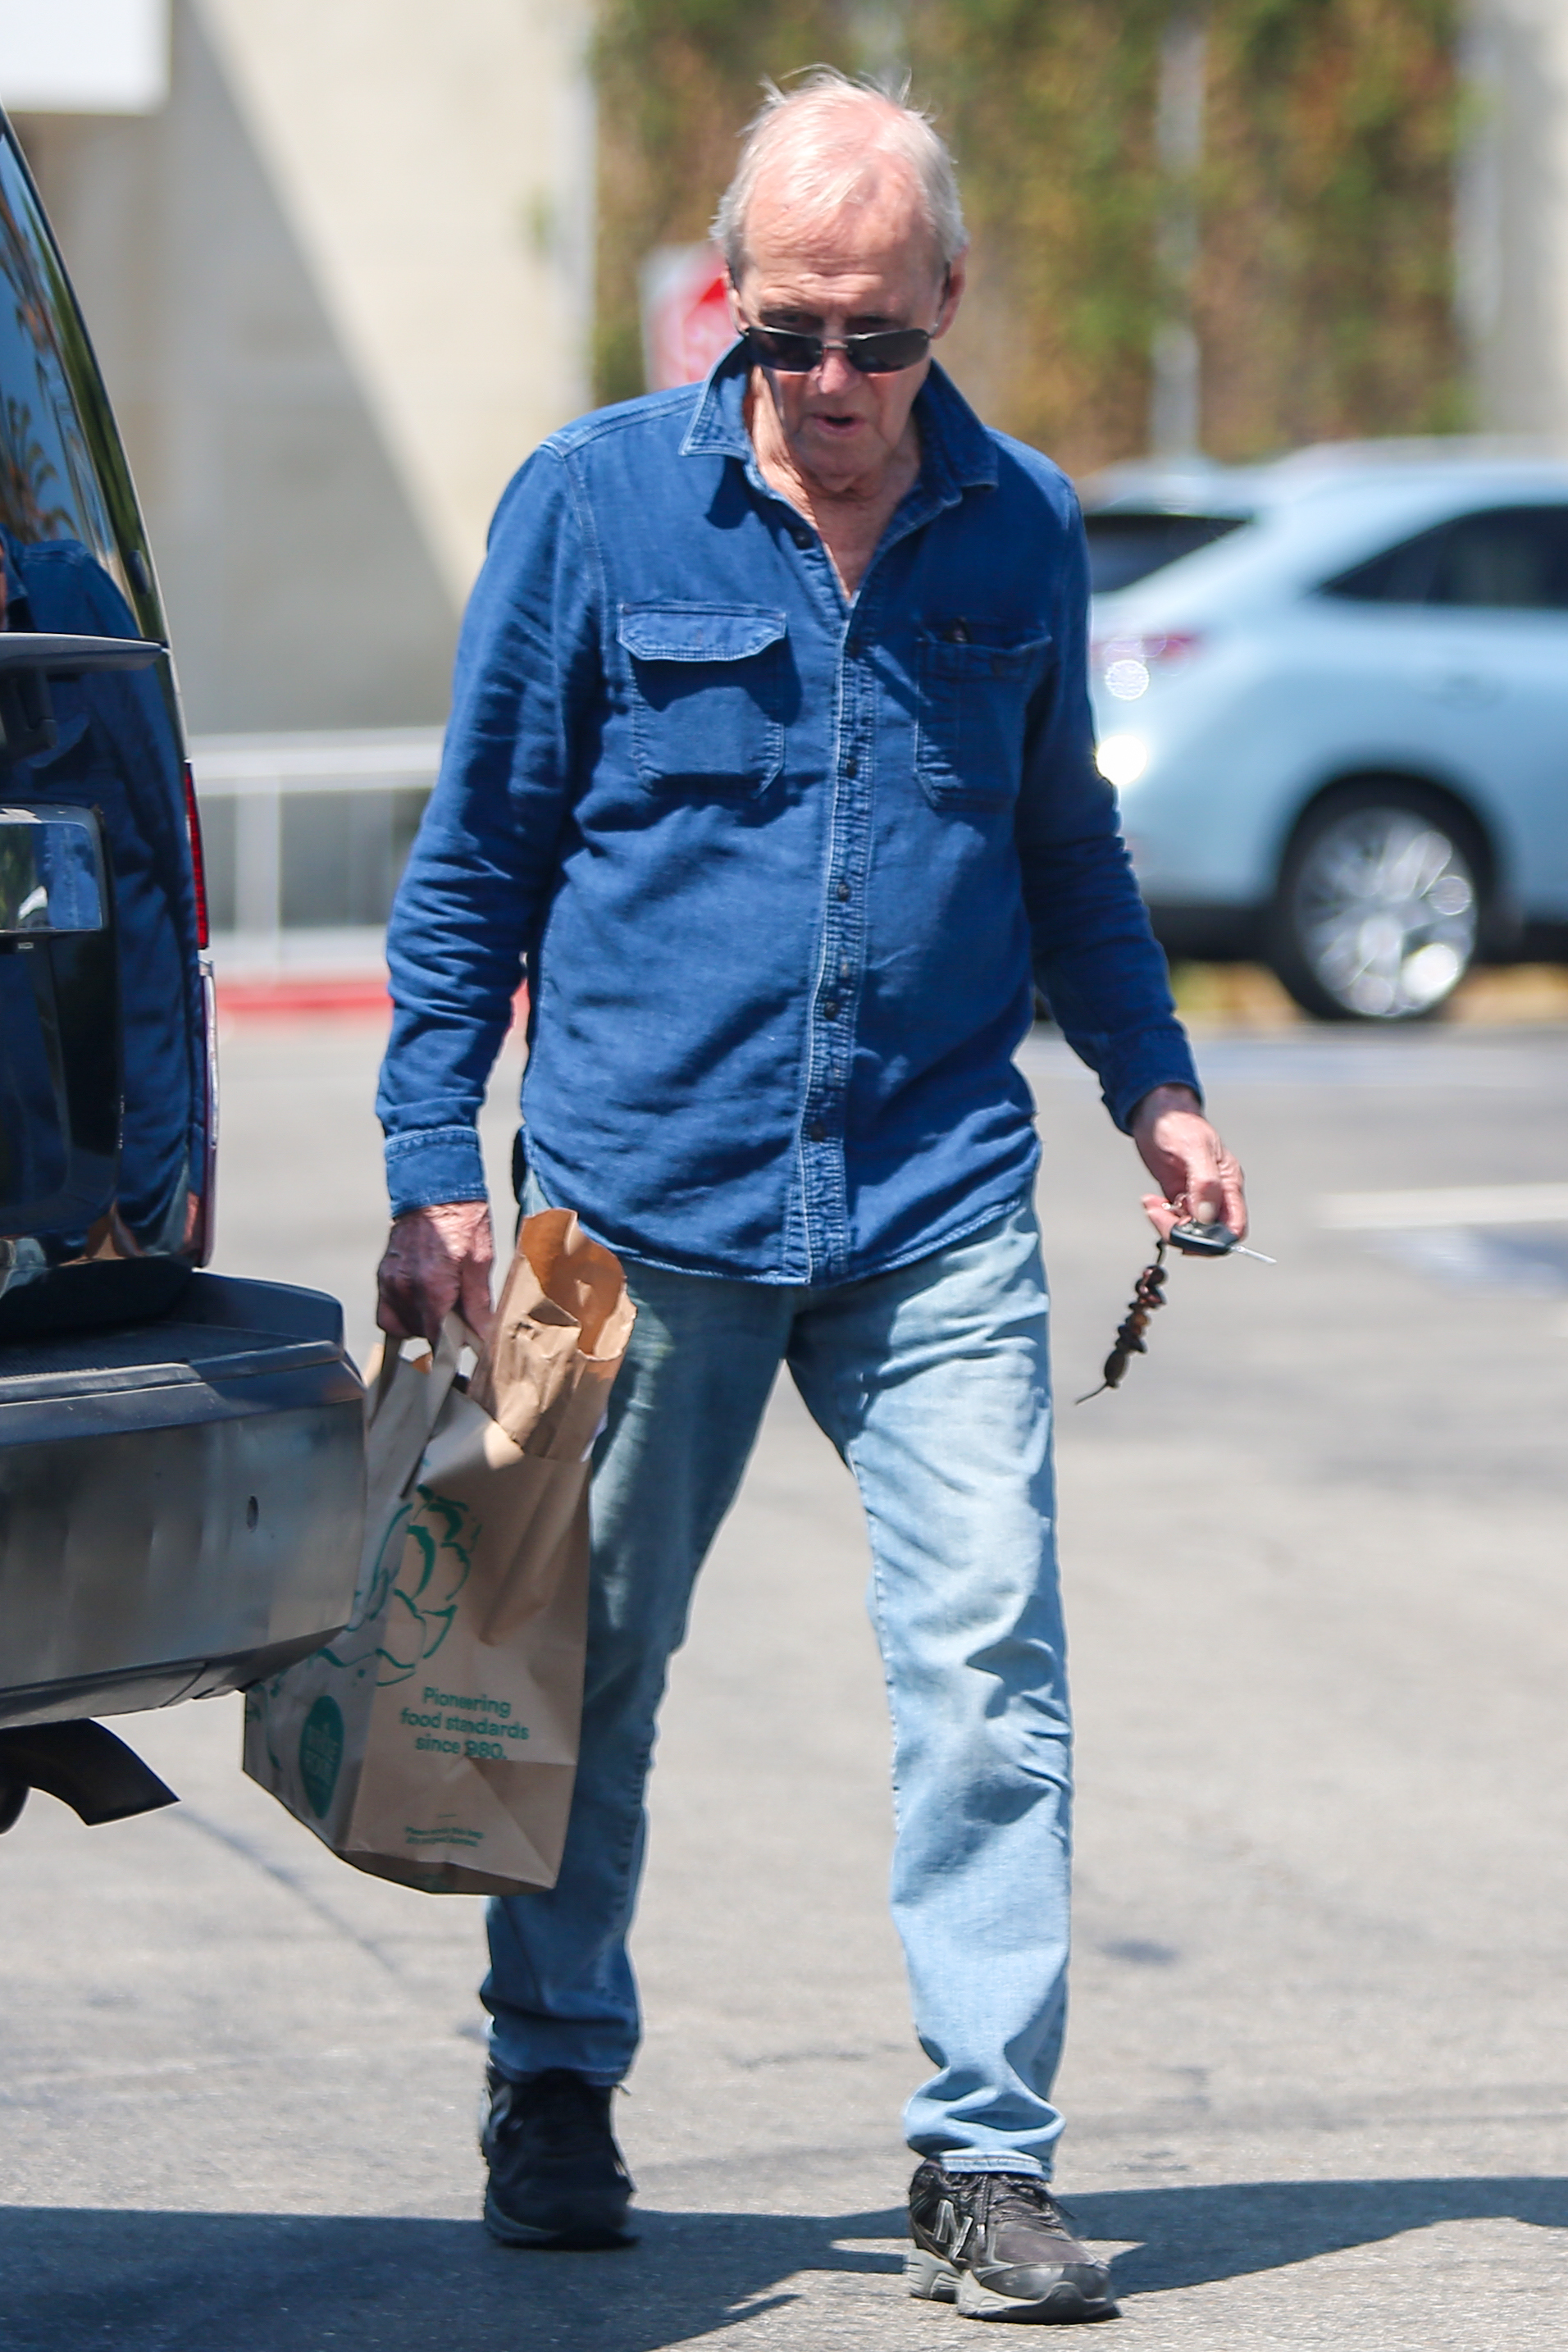 Paul Hogan Shops at Whole Foods Grocery Store in L.A.: Photos | Closer ...